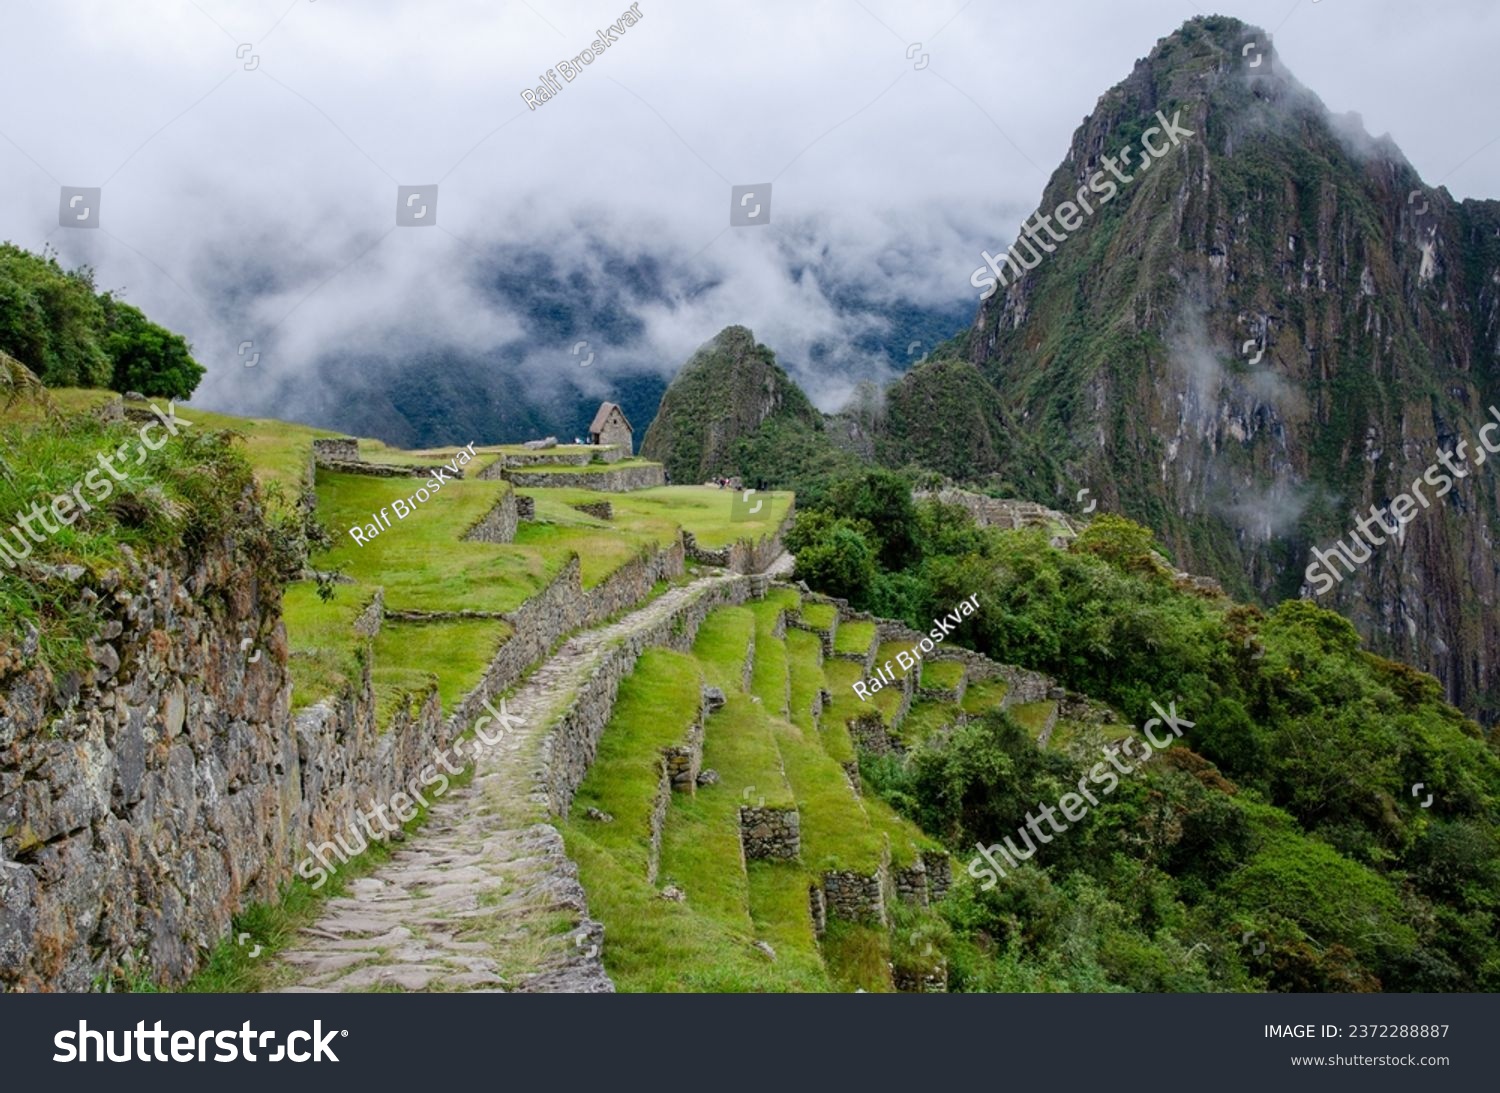 On the Inca Trail coming down from the Sun Gate (Inti Punku, elevation 2,745 m) to Machu Picchu, elevation 2,446 m. The caretaker's hut in the background marks the entrance to the Inca citadel below. #2372288887